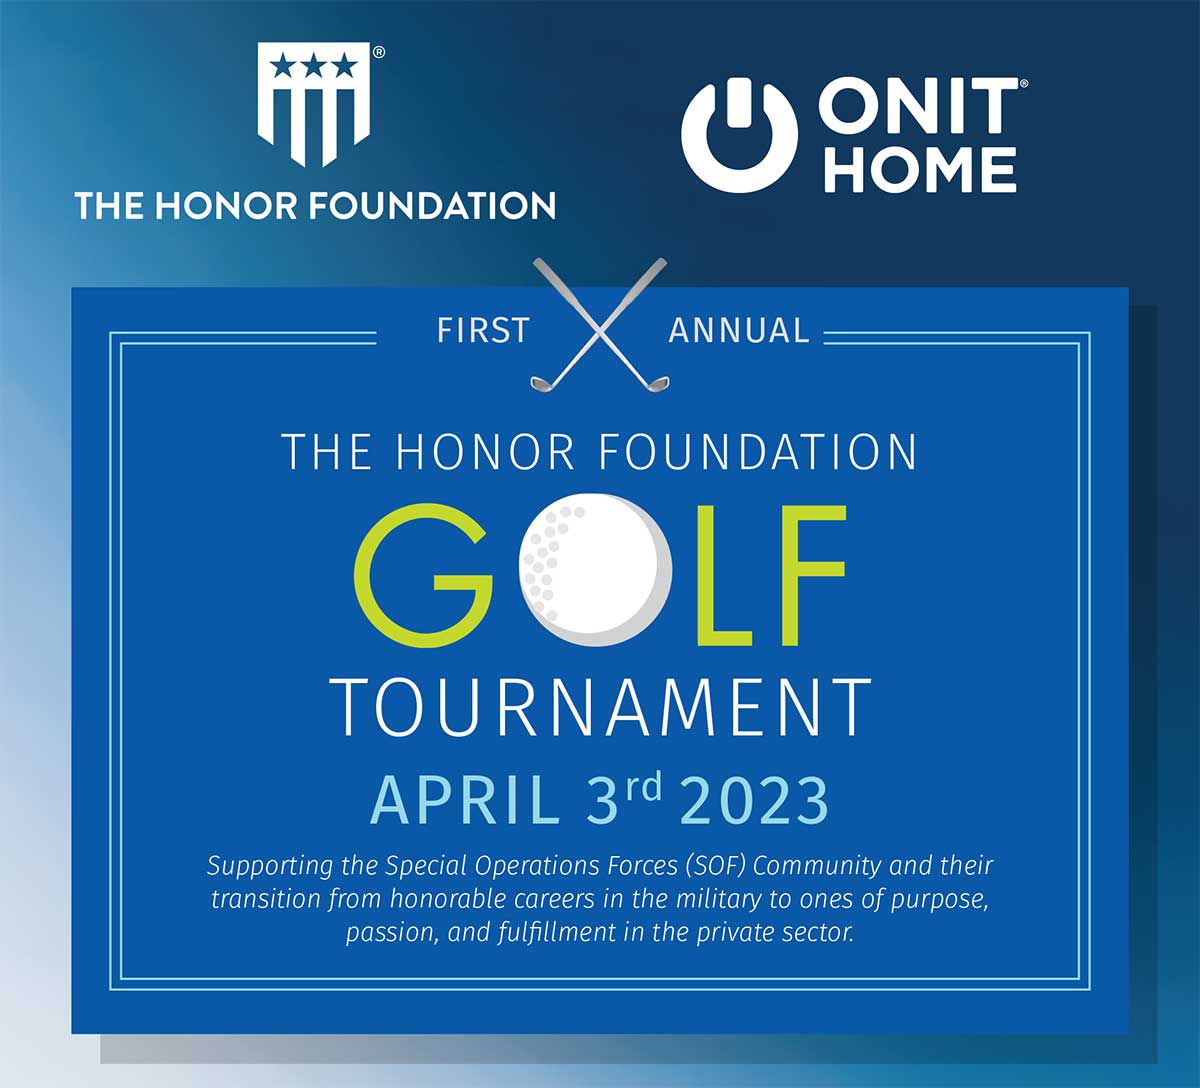 ONIT Home & The Honor Foundation Announce 2023 1st Annual THF Golf Tournament